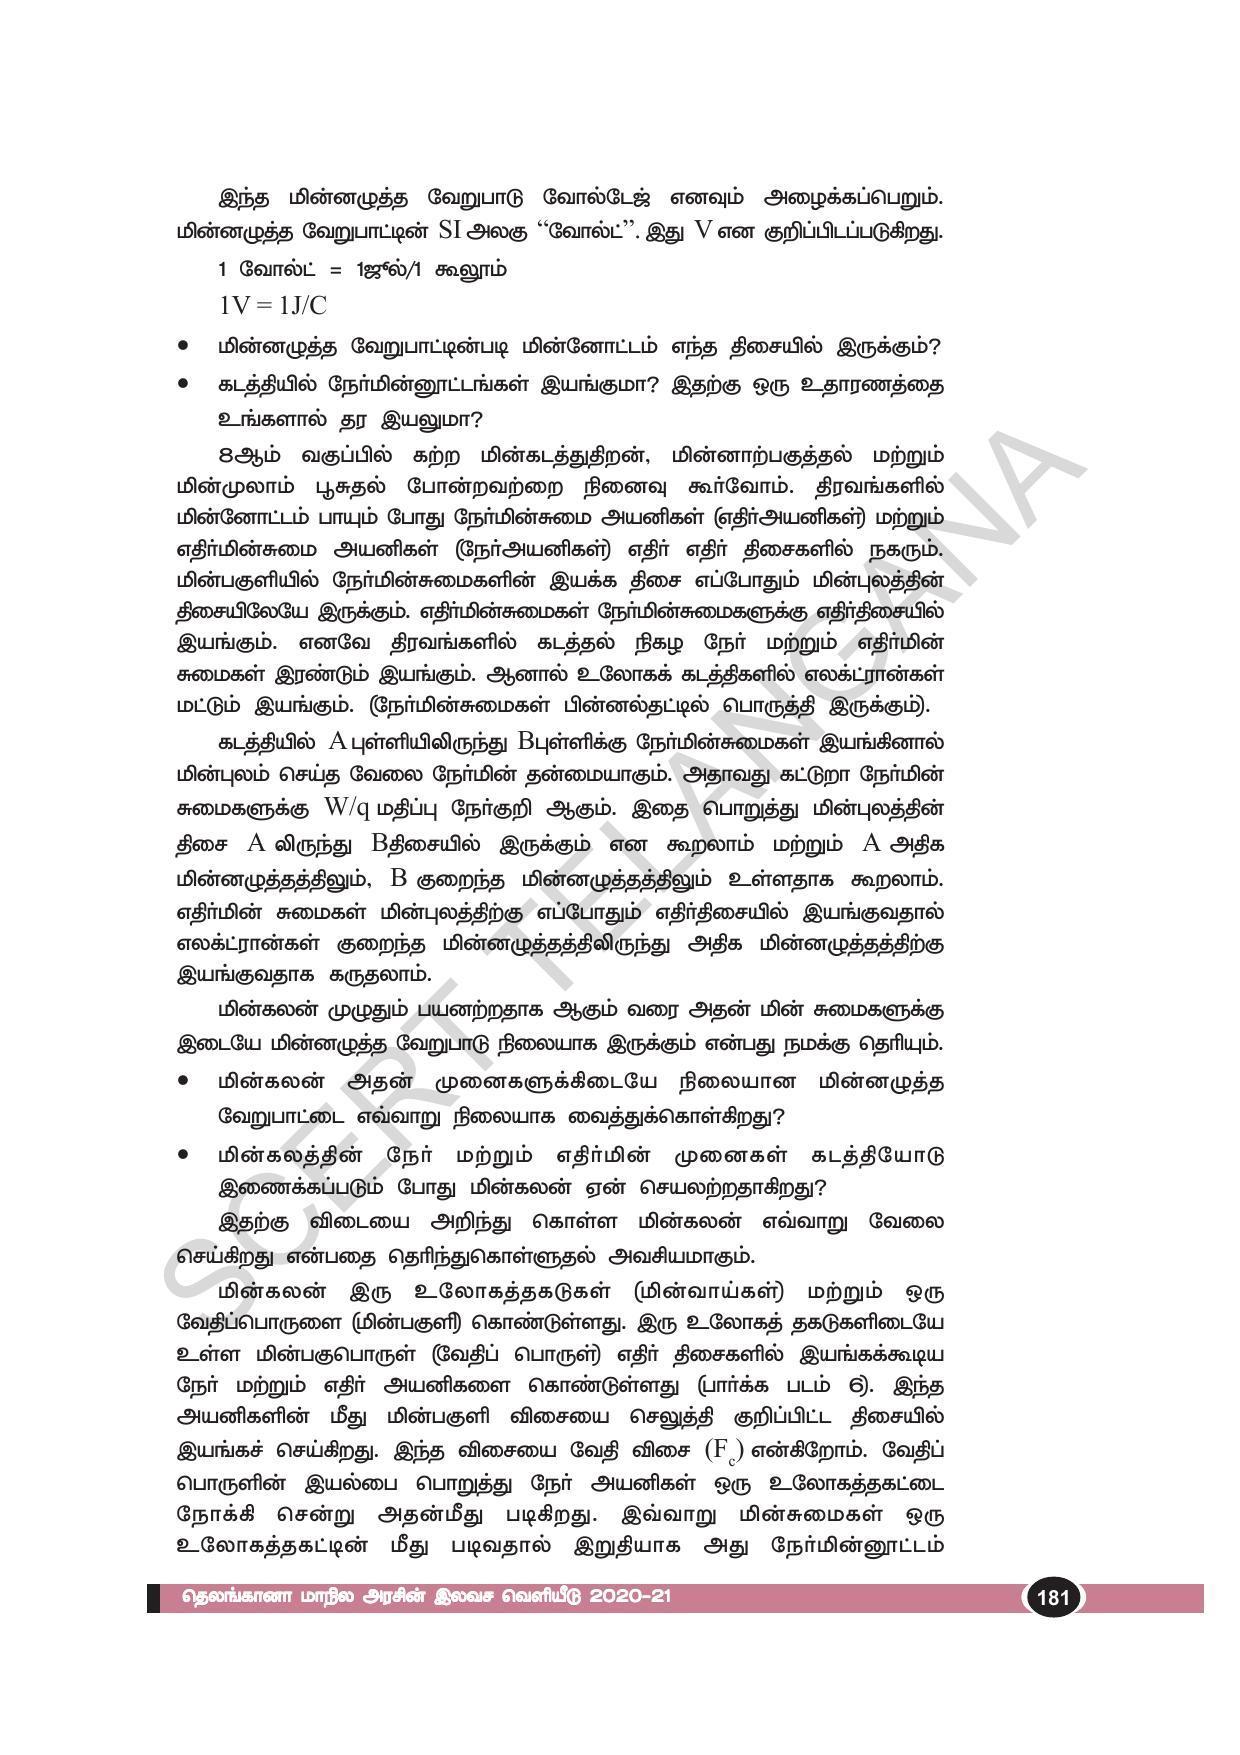 TS SCERT Class 10 Physical Science(Tamil Medium) Text Book - Page 193